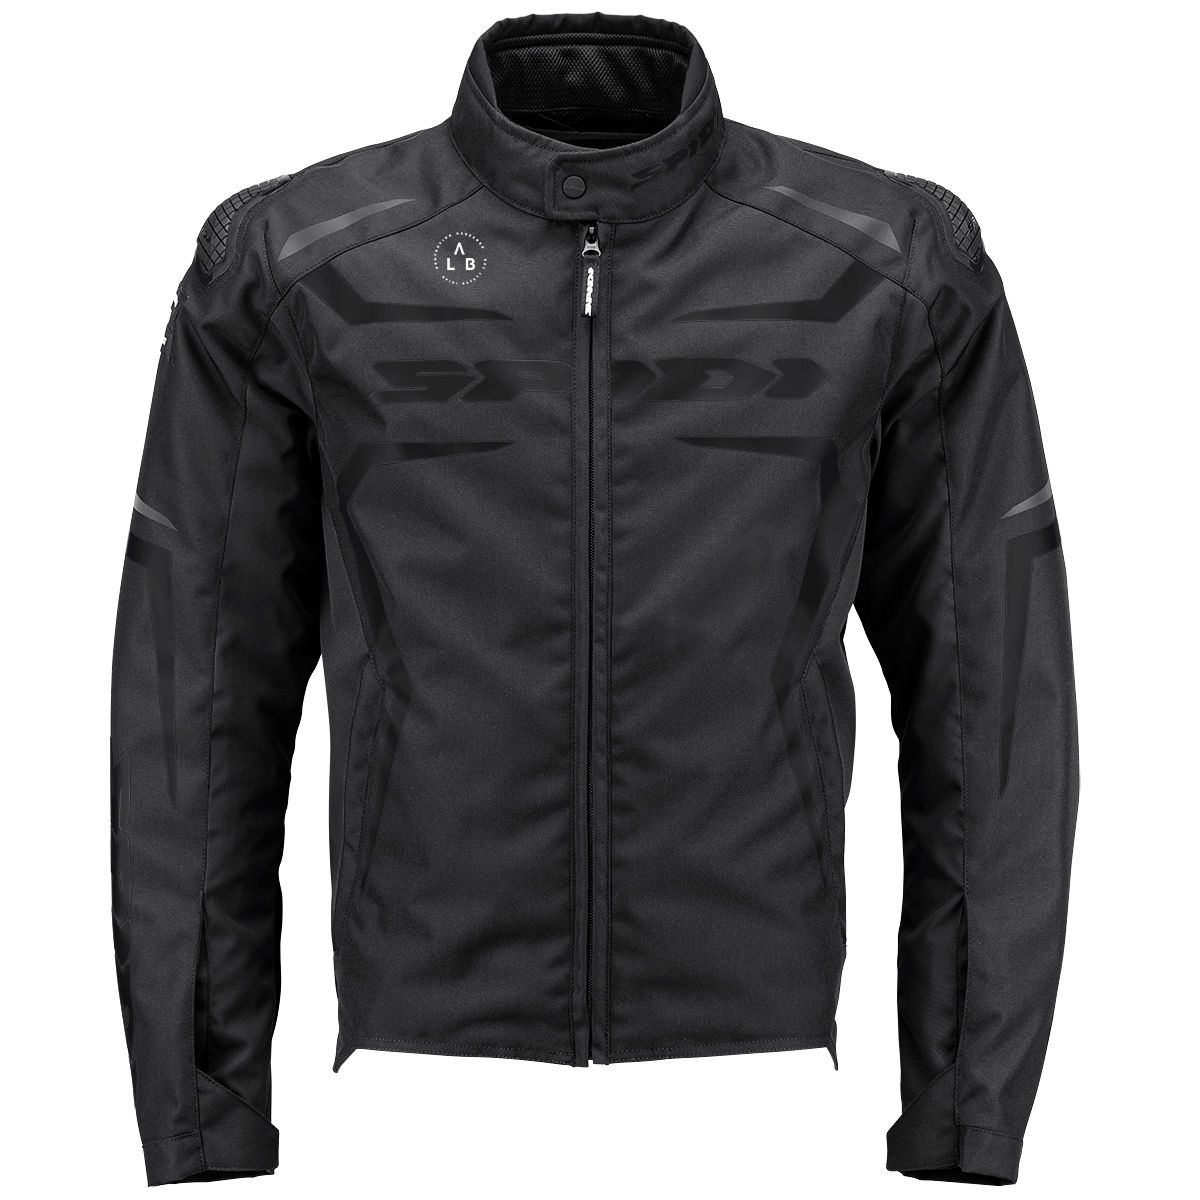 Image of Spidi Race-Evo H2Out Jacket Black Size 3XL ID 8030161460407